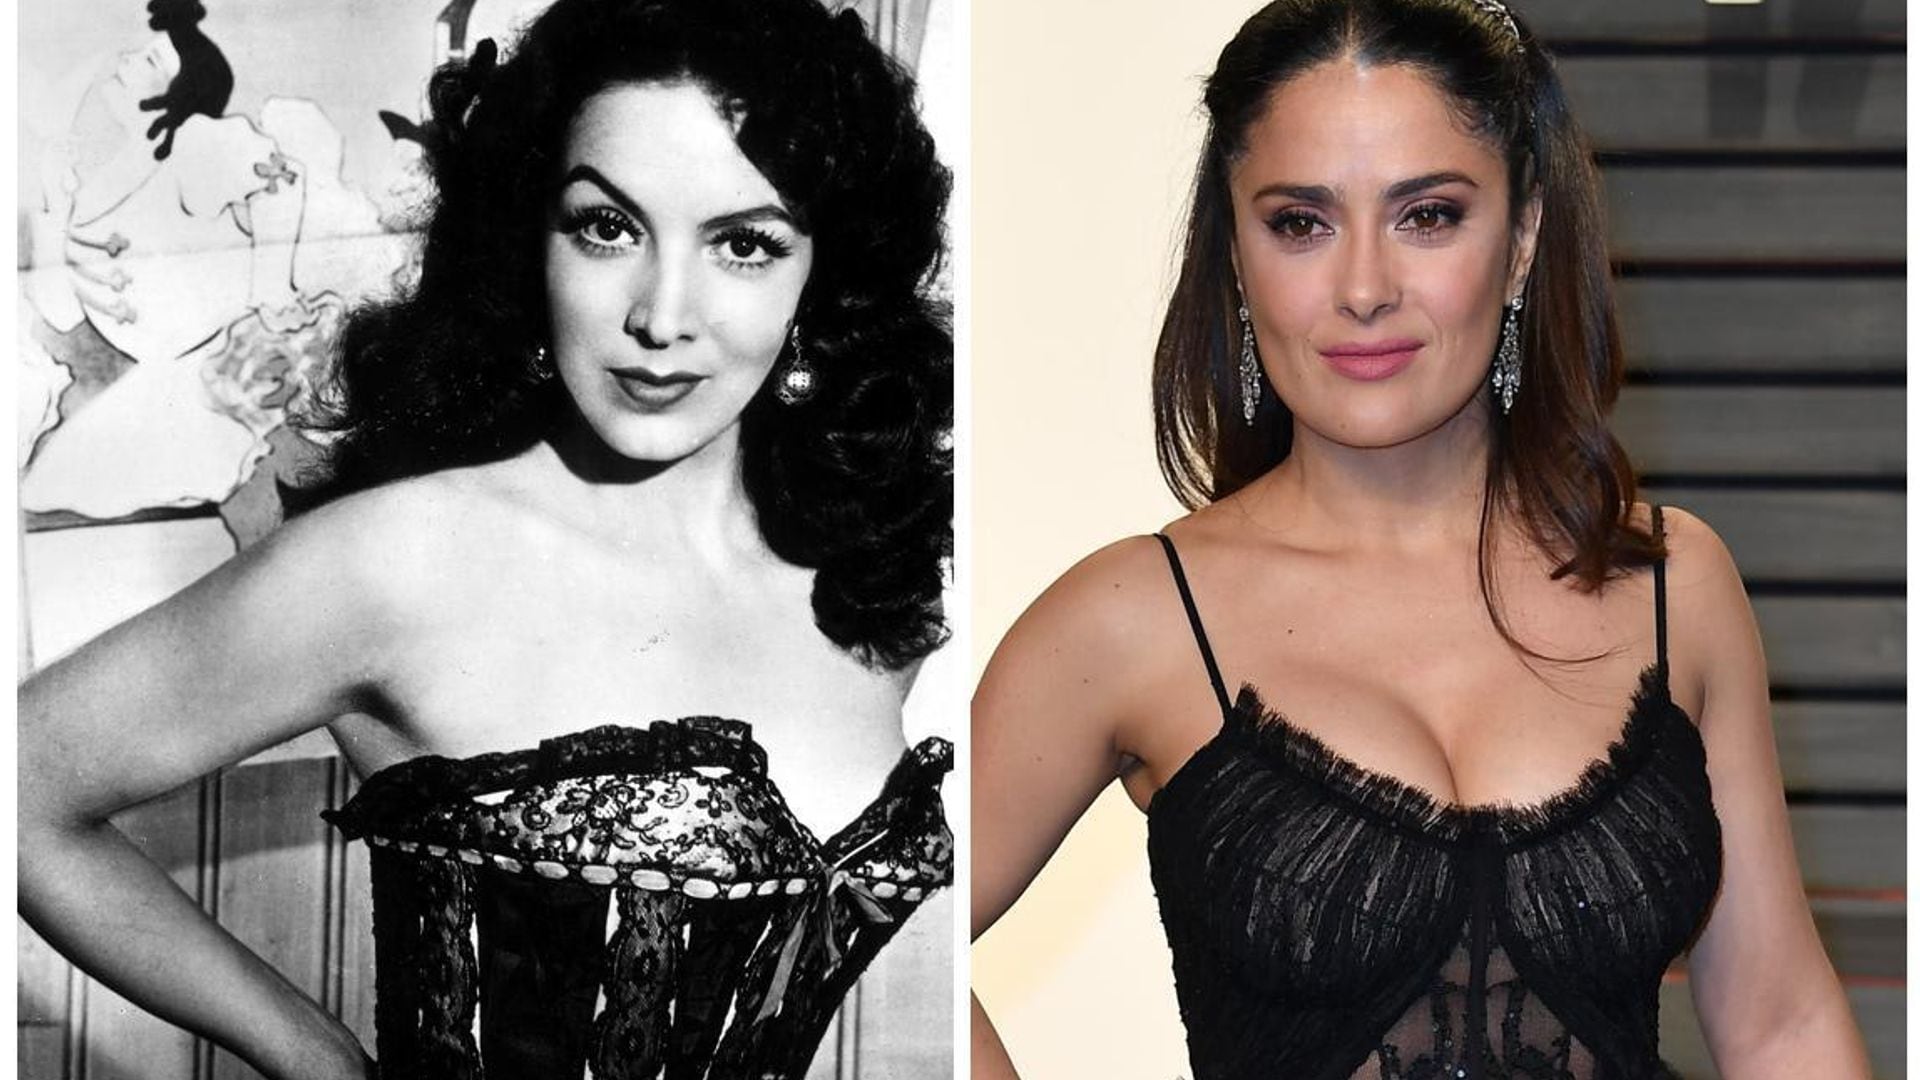 Salma Hayek honors Mexican icon María Félix: will she play her in biopic?